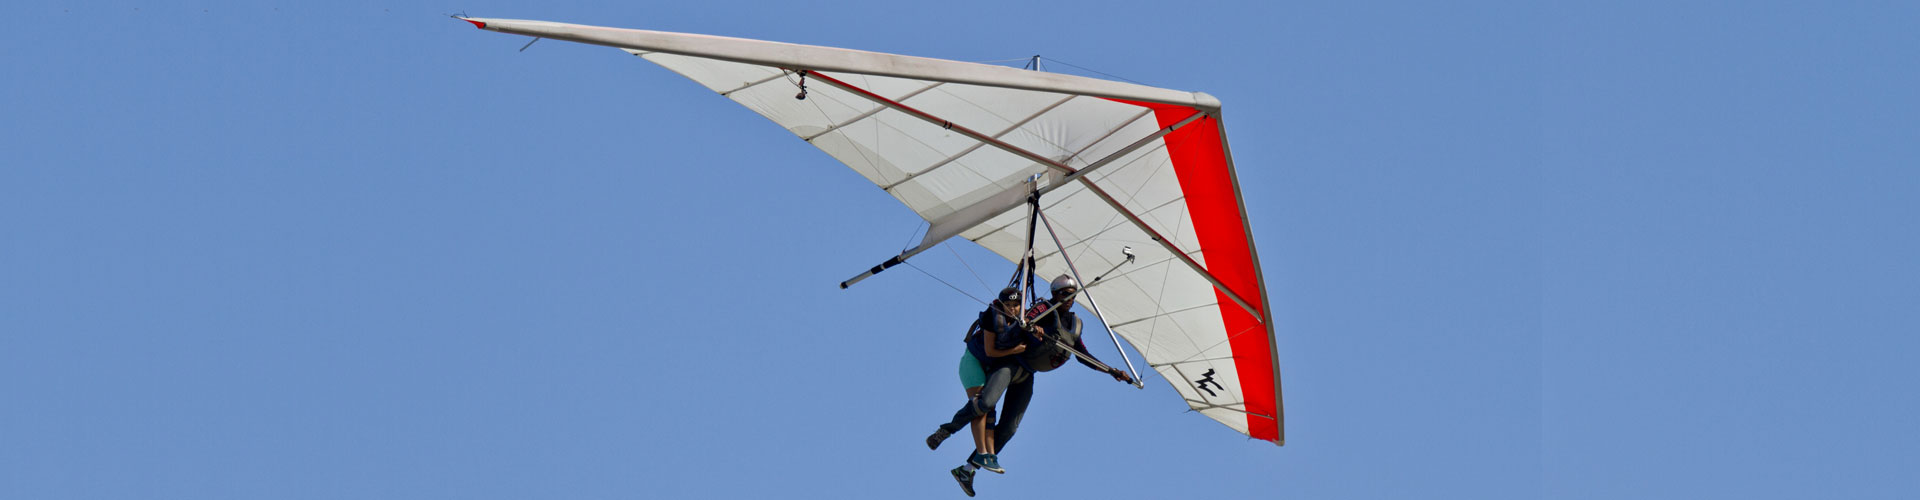 Hang Gliding In The Outer Banks